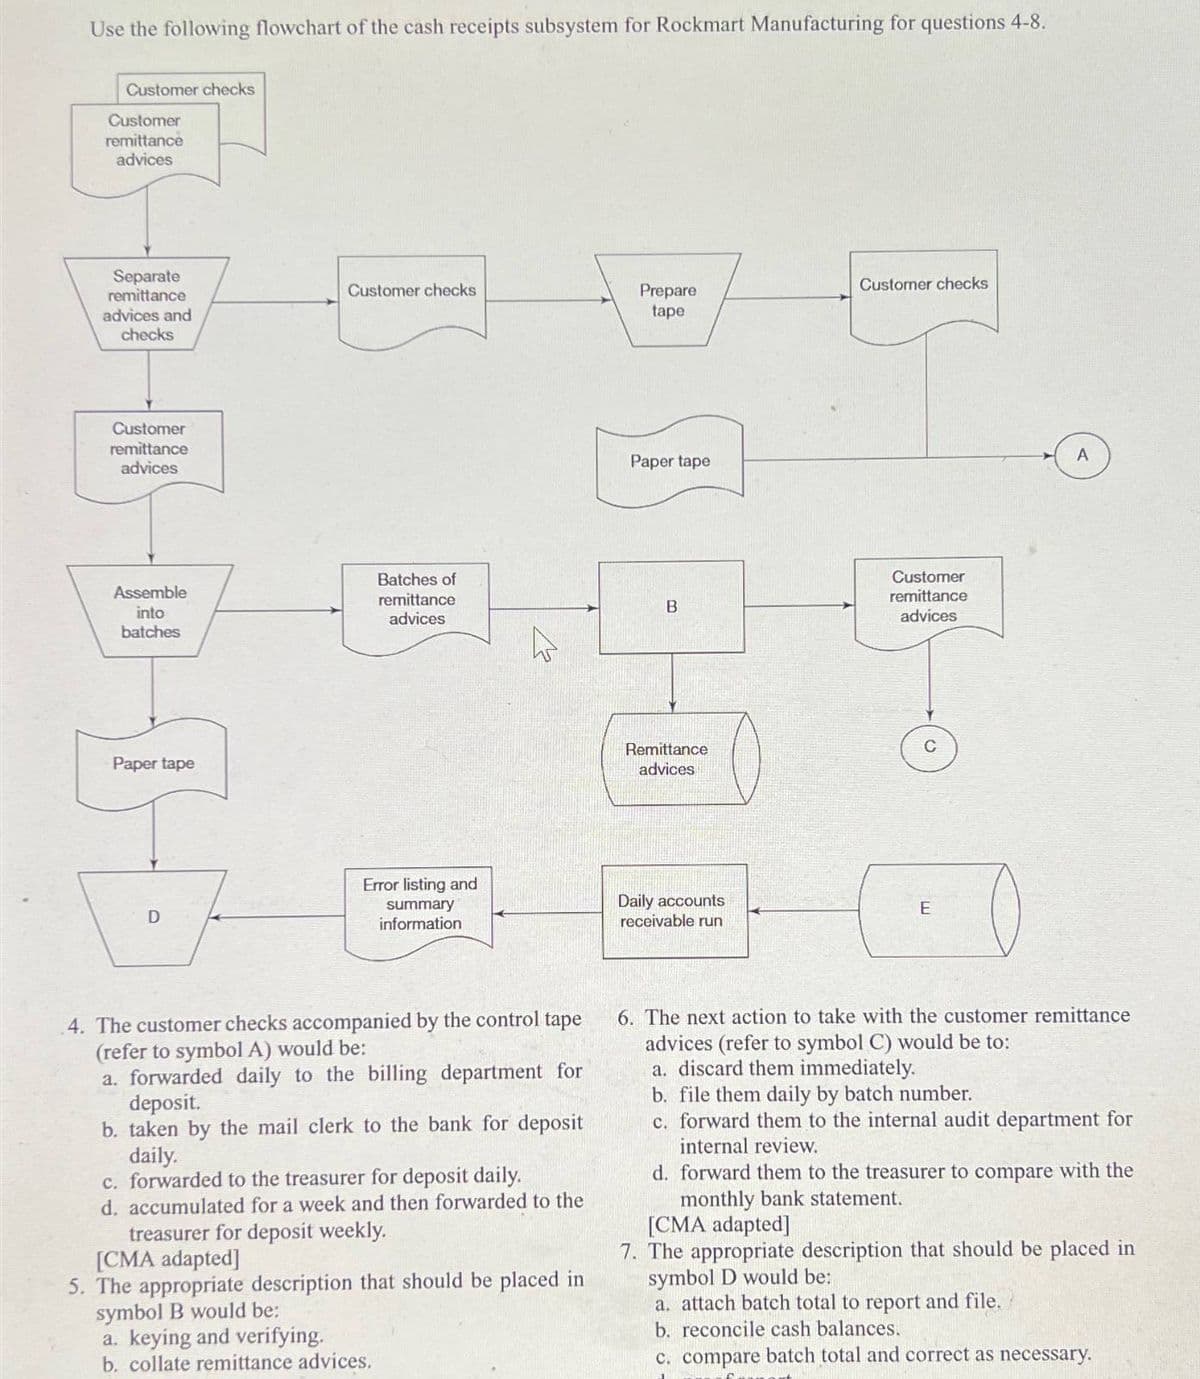 Use the following flowchart of the cash receipts subsystem for Rockmart Manufacturing for questions 4-8.
Customer checks
Customer
remittance
advices
Separate
remittance
advices and
checks
Customer
remittance
advices
Customer checks
Prepare
tape
Customer checks
Paper tape
Assemble
into
batches
Batches of
remittance
advices
B
Customer
remittance
advices
Paper tape
Remittance
advices
Error listing and
D
summary
information
Daily accounts
receivable run
E
A
4. The customer checks accompanied by the control tape
(refer to symbol A) would be:
a. forwarded daily to the billing department for
deposit.
b. taken by the mail clerk to the bank for deposit
daily.
c. forwarded to the treasurer for deposit daily.
d. accumulated for a week and then forwarded to the
treasurer for deposit weekly.
[CMA adapted]
5. The appropriate description that should be placed in
symbol B would be:
a. keying and verifying.
b. collate remittance advices.
6. The next action to take with the customer remittance
advices (refer to symbol C) would be to:
a. discard them immediately.
b. file them daily by batch number.
c. forward them to the internal audit department for
internal review.
d. forward them to the treasurer to compare with the
monthly bank statement.
[CMA adapted]
7. The appropriate description that should be placed in
symbol D would be:
a. attach batch total to report and file.
b. reconcile cash balances.
c. compare batch total and correct as necessary.